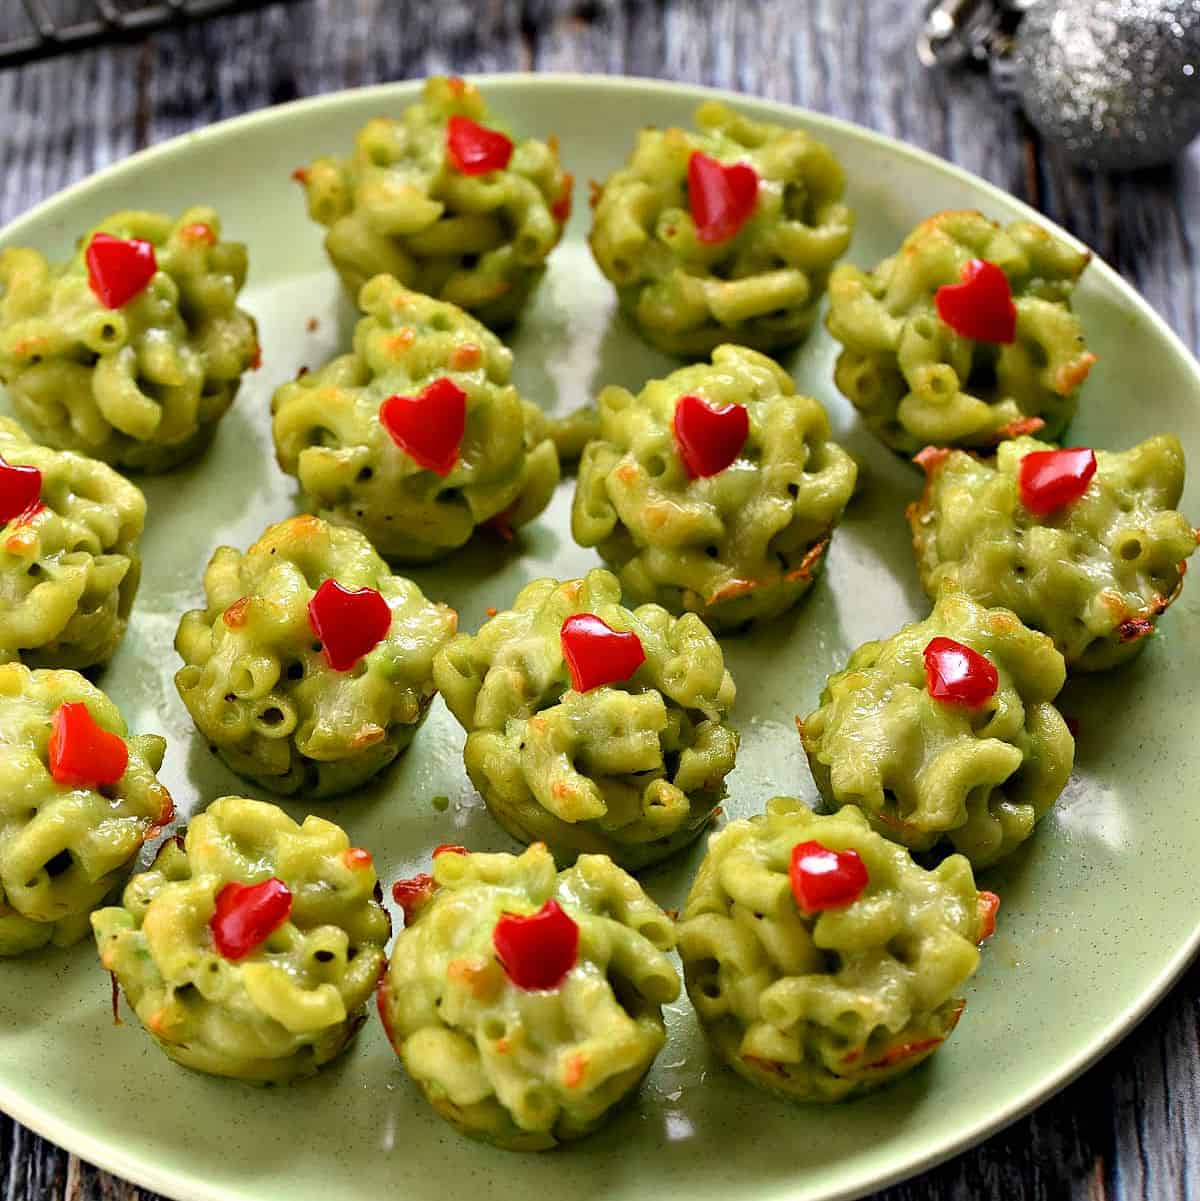 https://cookingwithcurls.com/wp-content/uploads/2021/12/Grinch-Mac-and-Cheese-Bites-with-red-pepper-hearts-recipe.-cookingwithcurls.com_.jpg